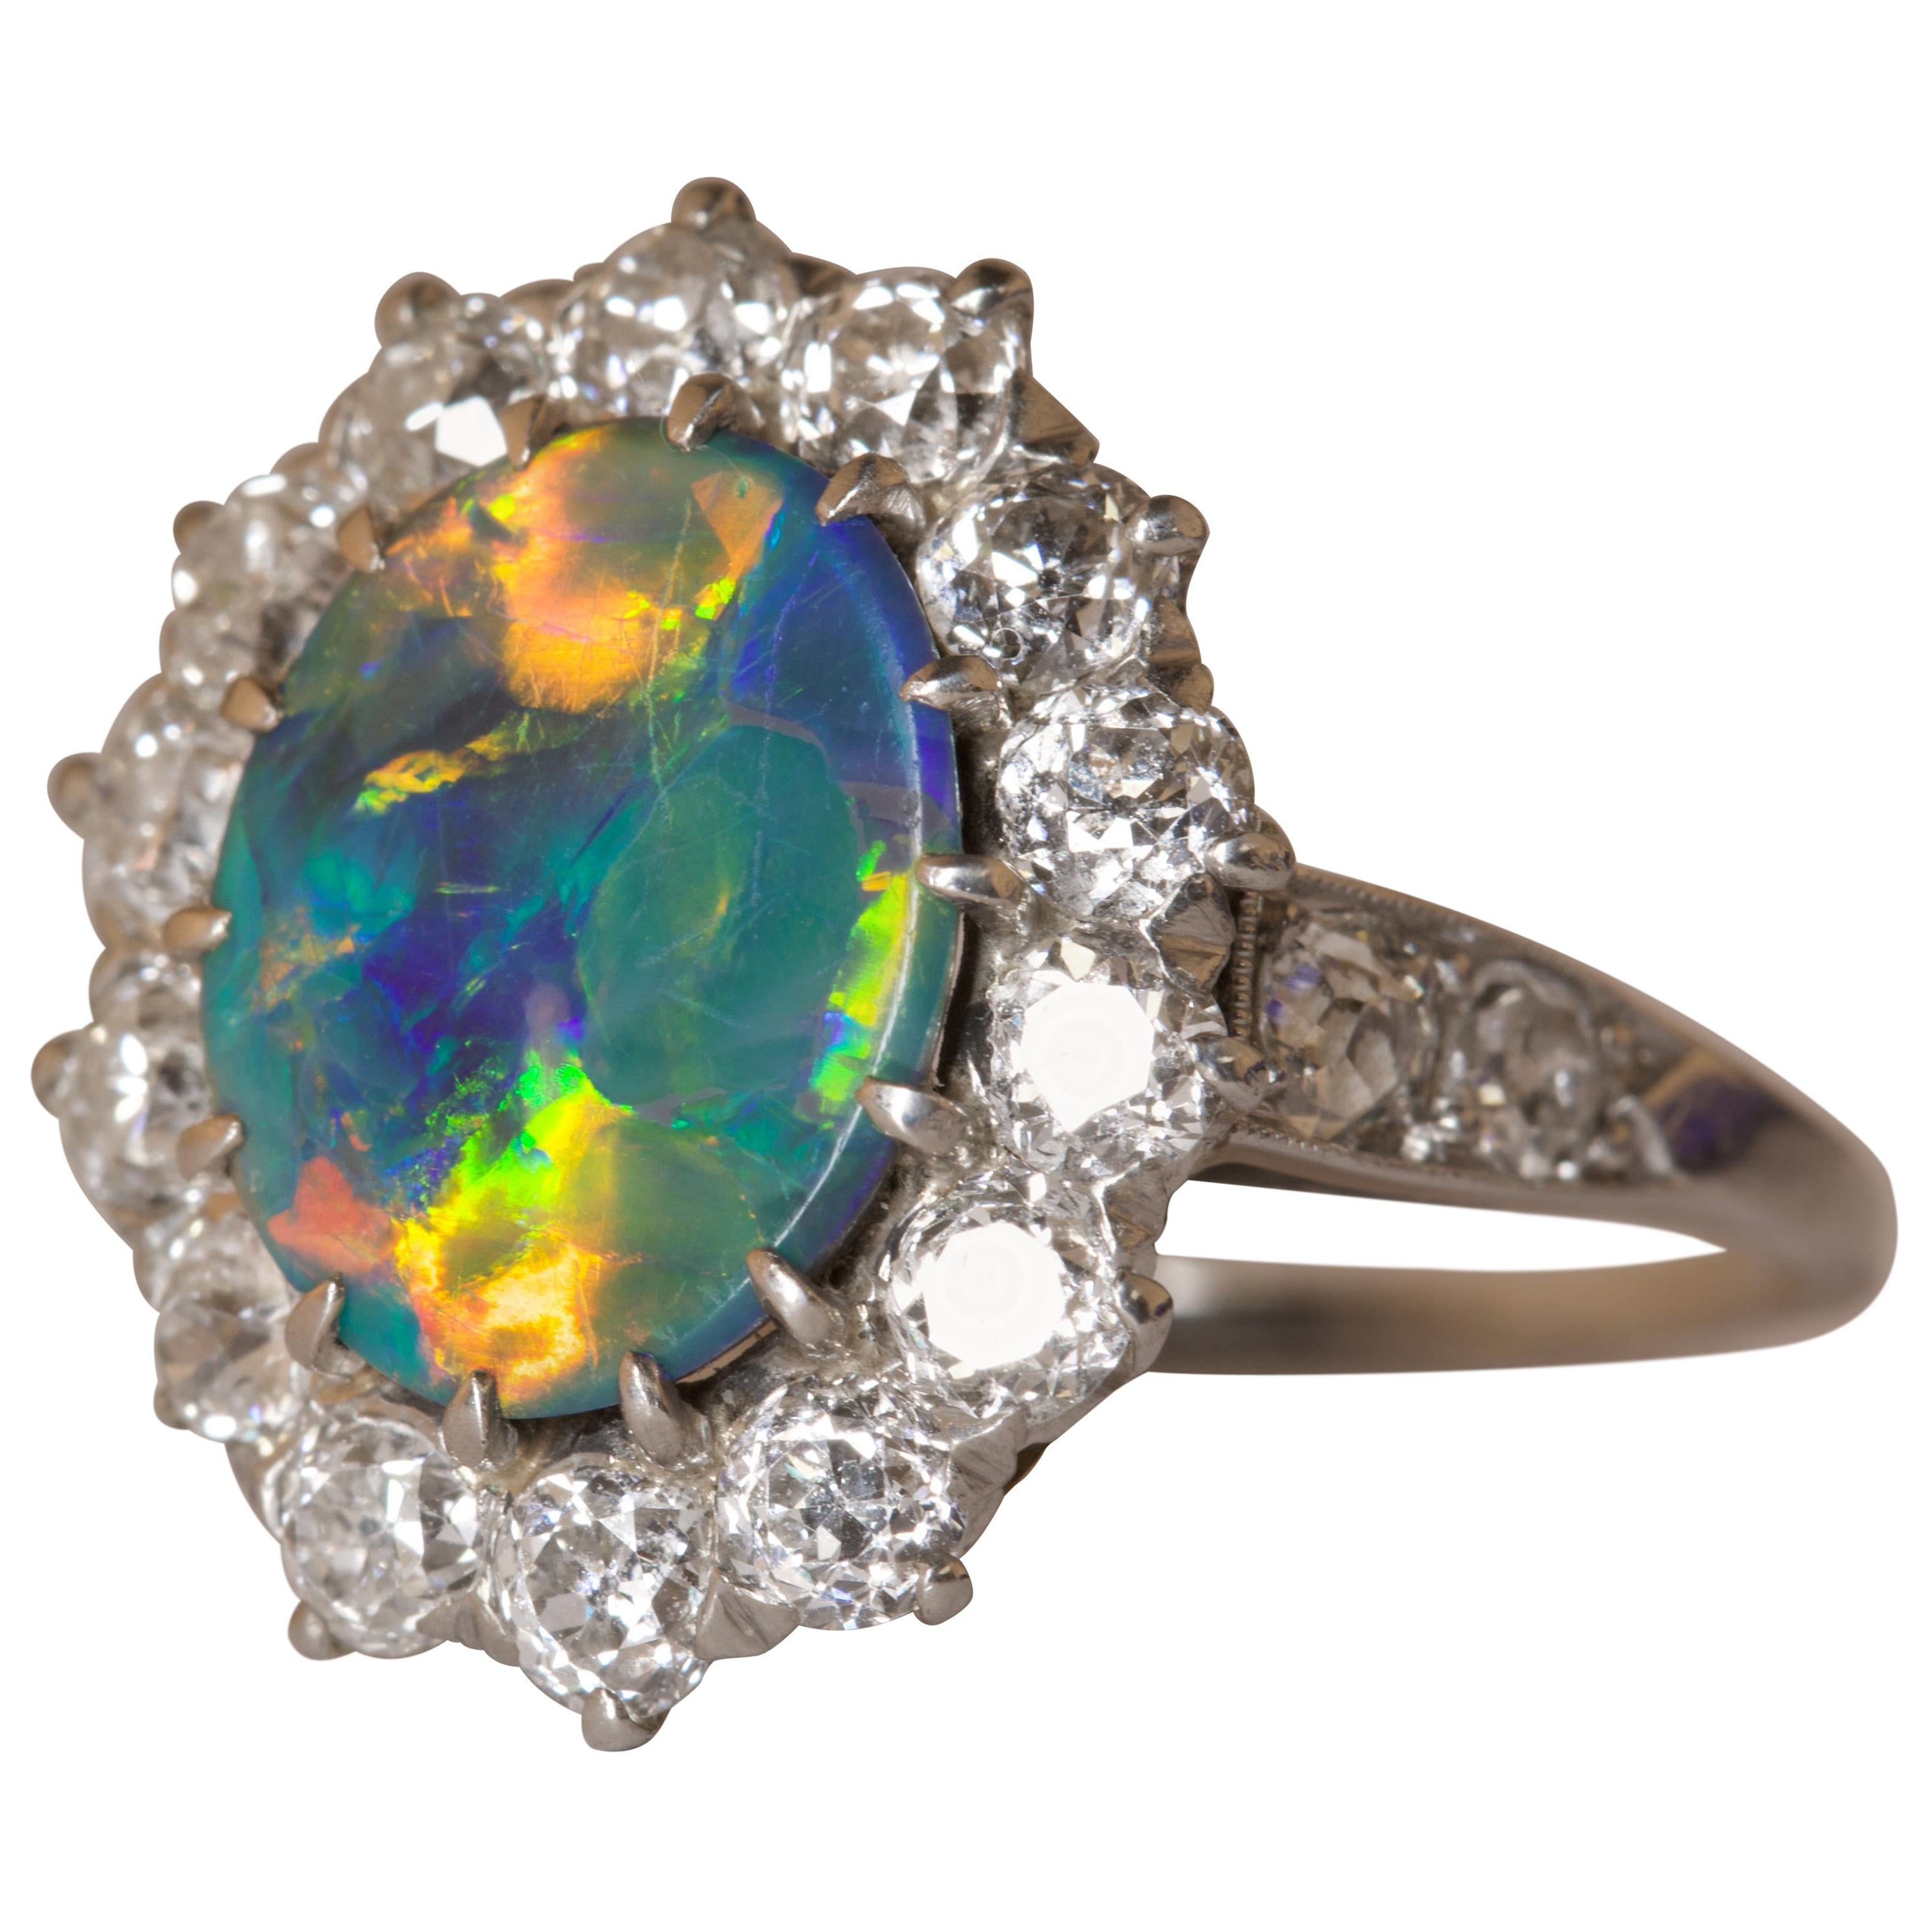 You could be gazing into a galaxy in the sky, but instead you have the added bonus of carrying this around proudly on your finger and losing yourself in it whenever you wish to escape the everyday normalities. 

This mesmerising black opal measuring